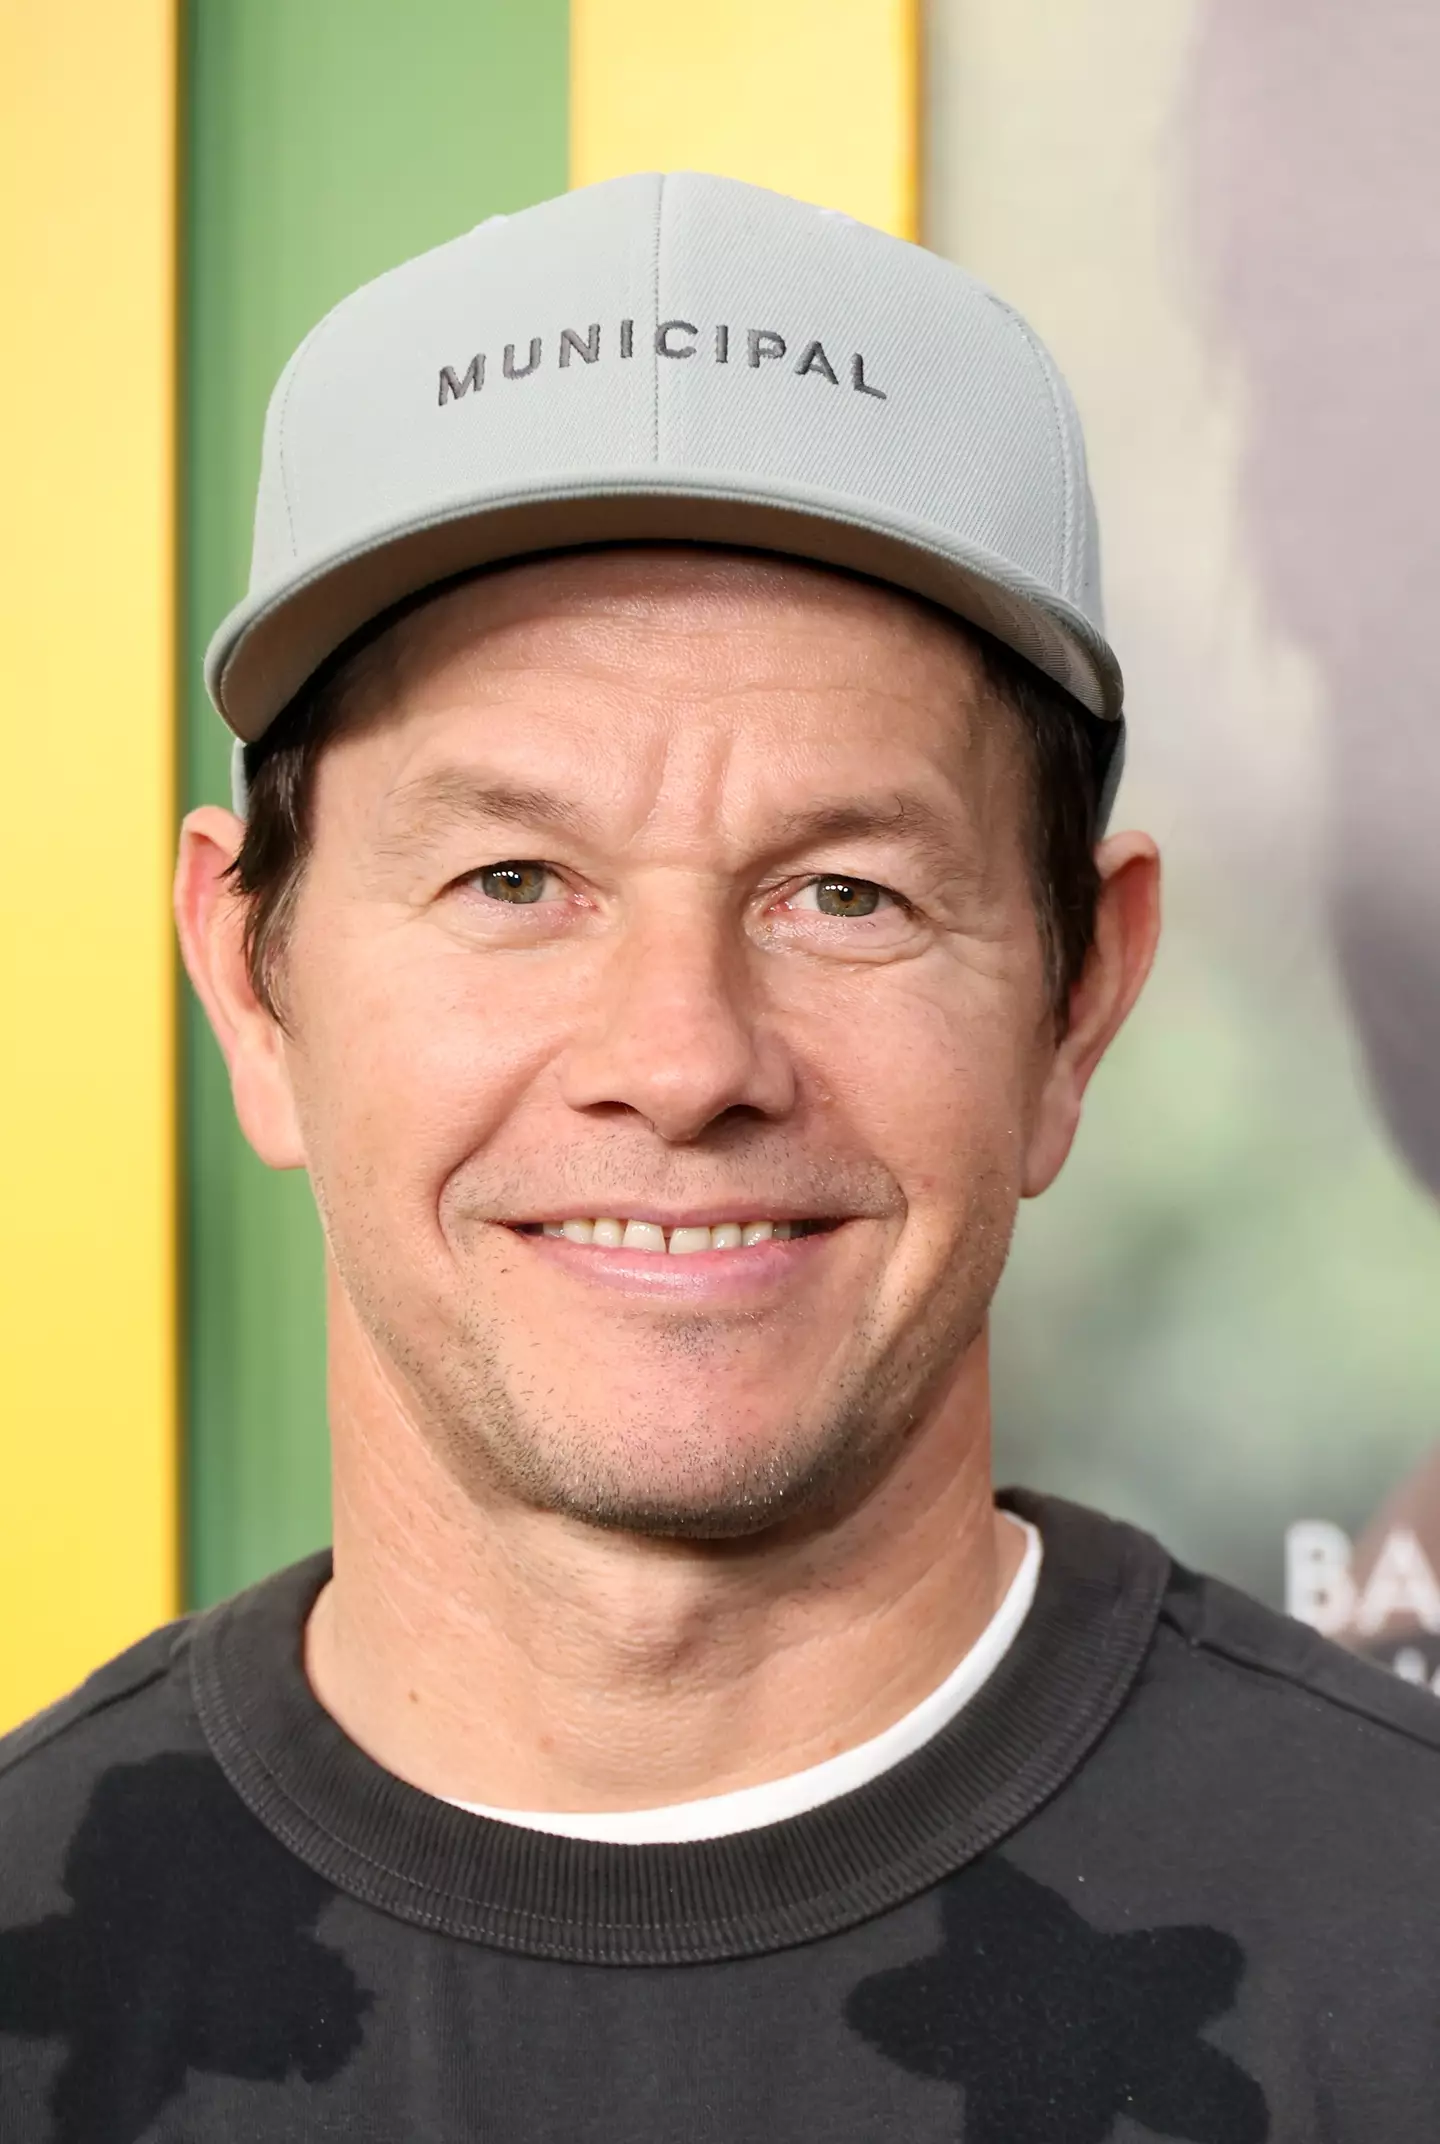 Wahlberg has shares in the company F45. (Monica Schipper/Getty Images)